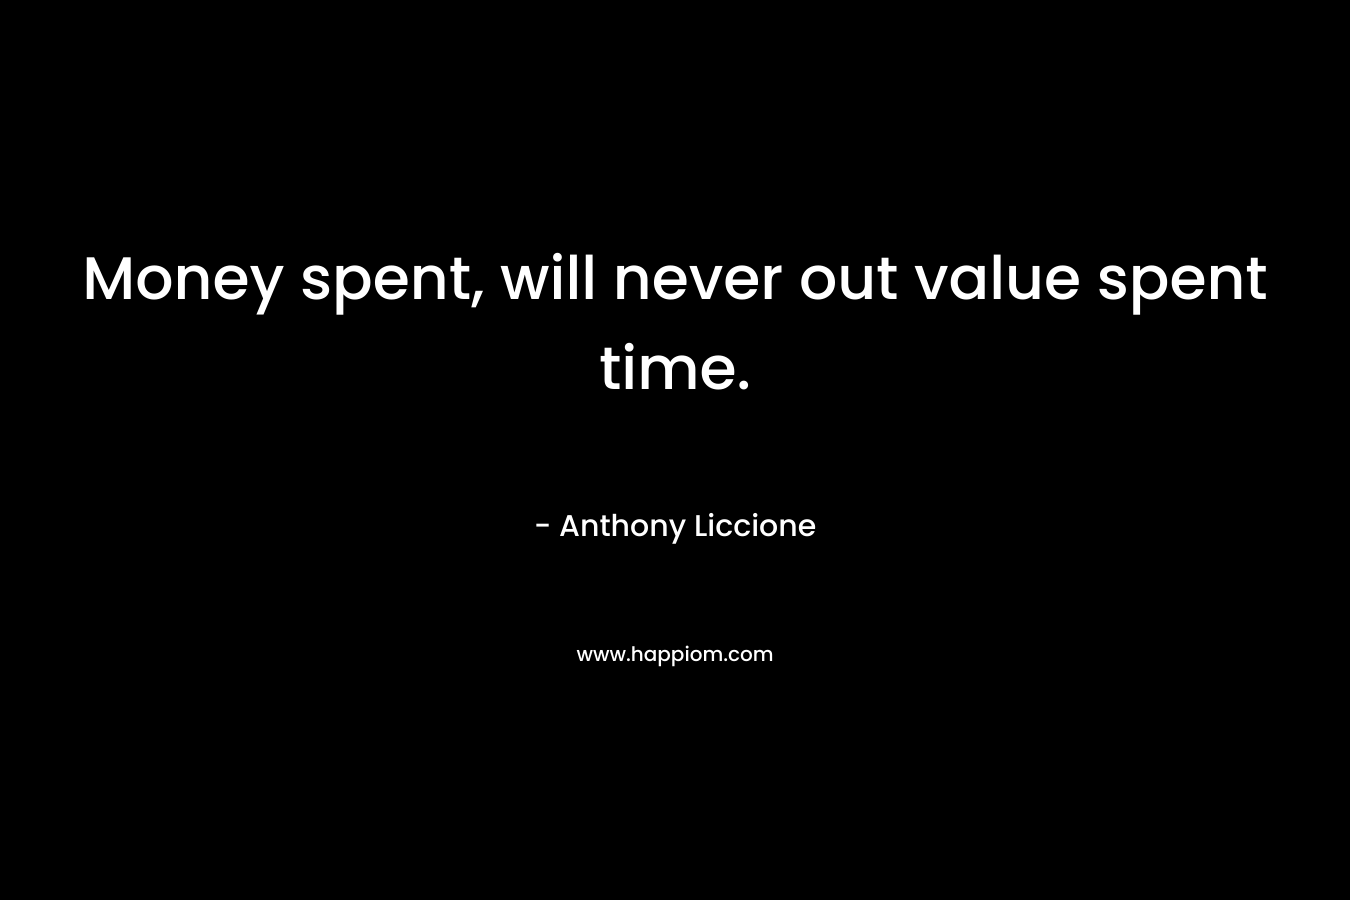 Money spent, will never out value spent time.